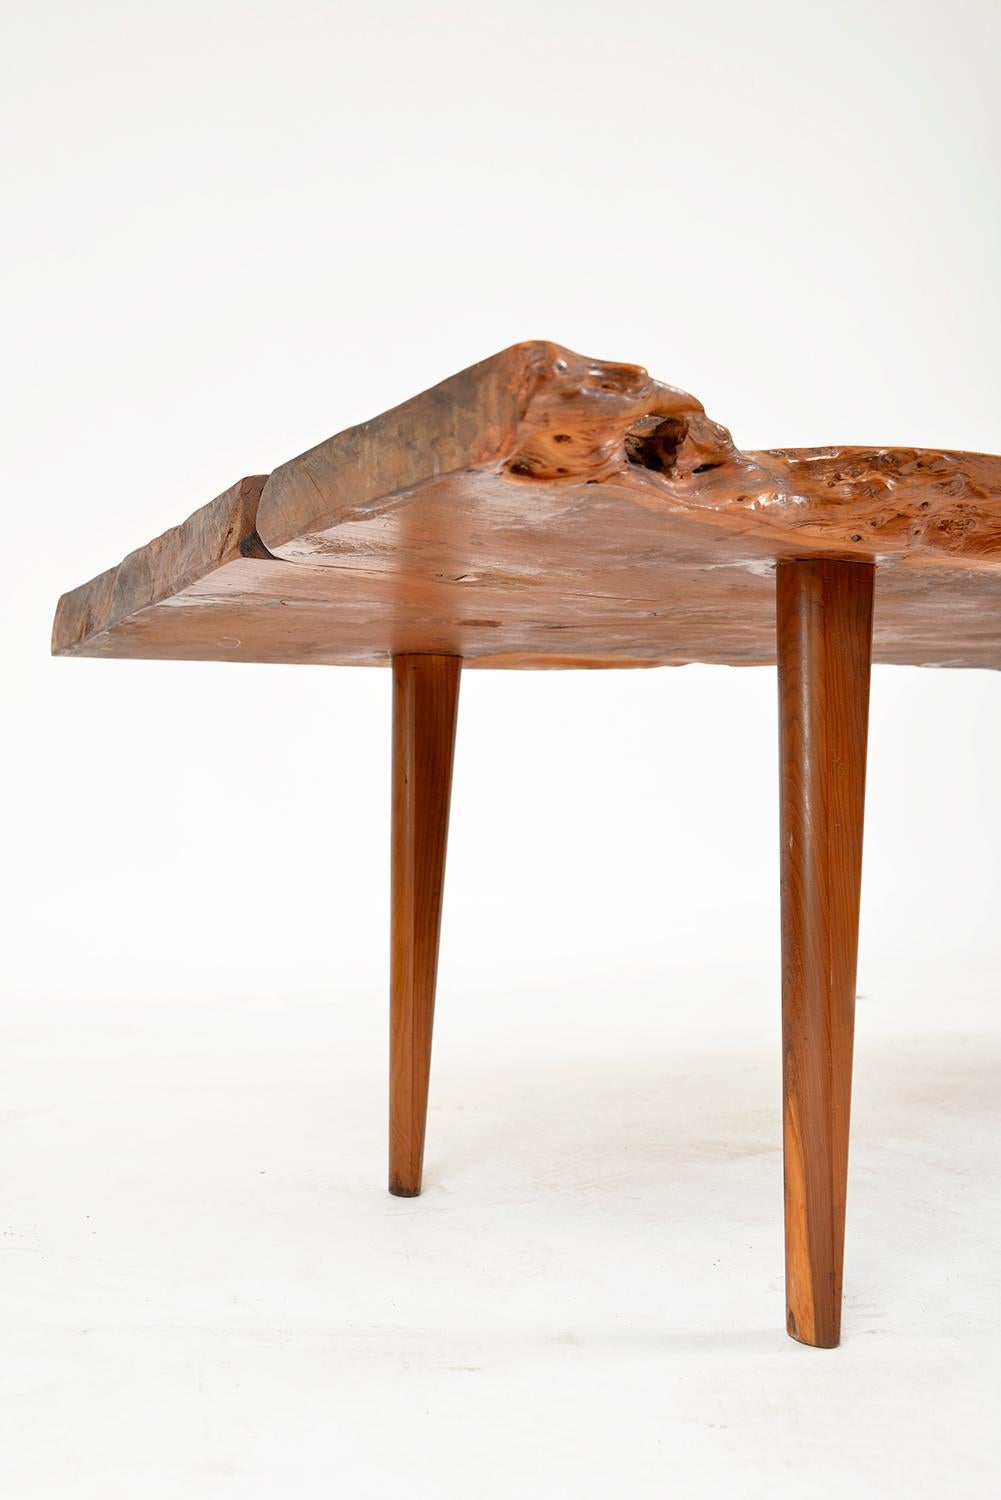 Yew Wood Live Edge Plank Coffee Table by Reynolds of Ludlow English 1950s 1960s 1